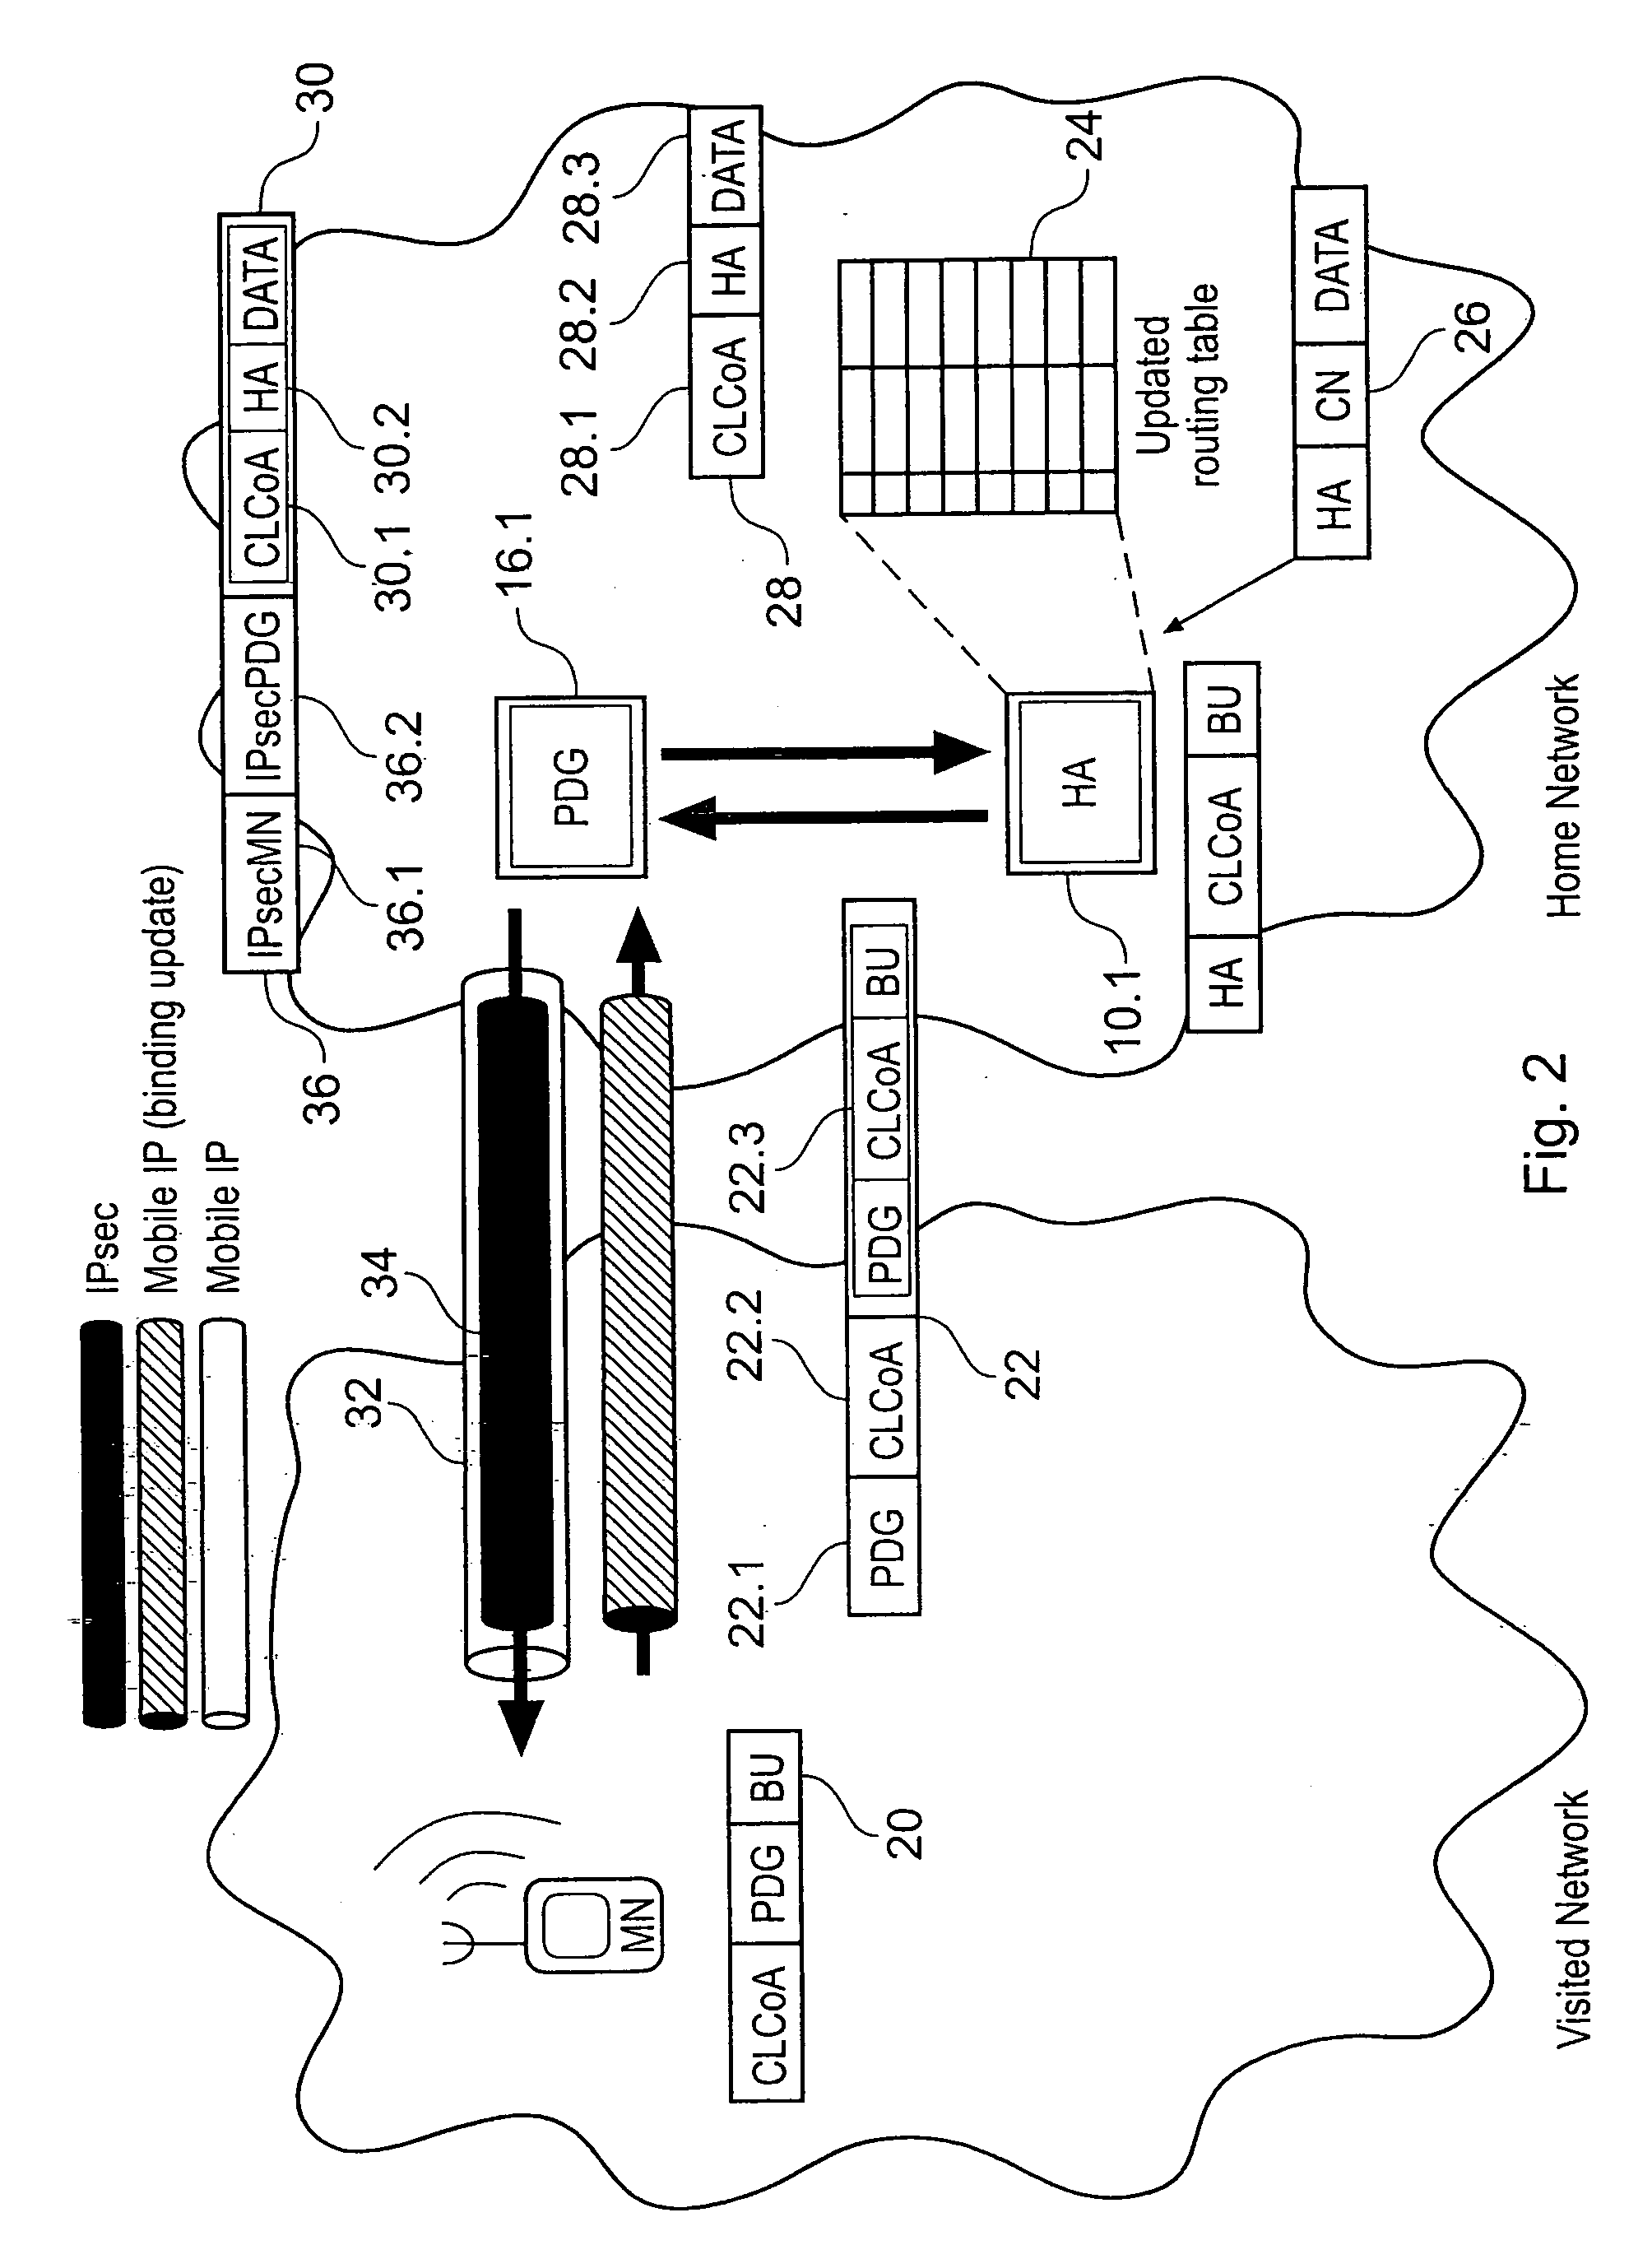 Telecommunications System and Method